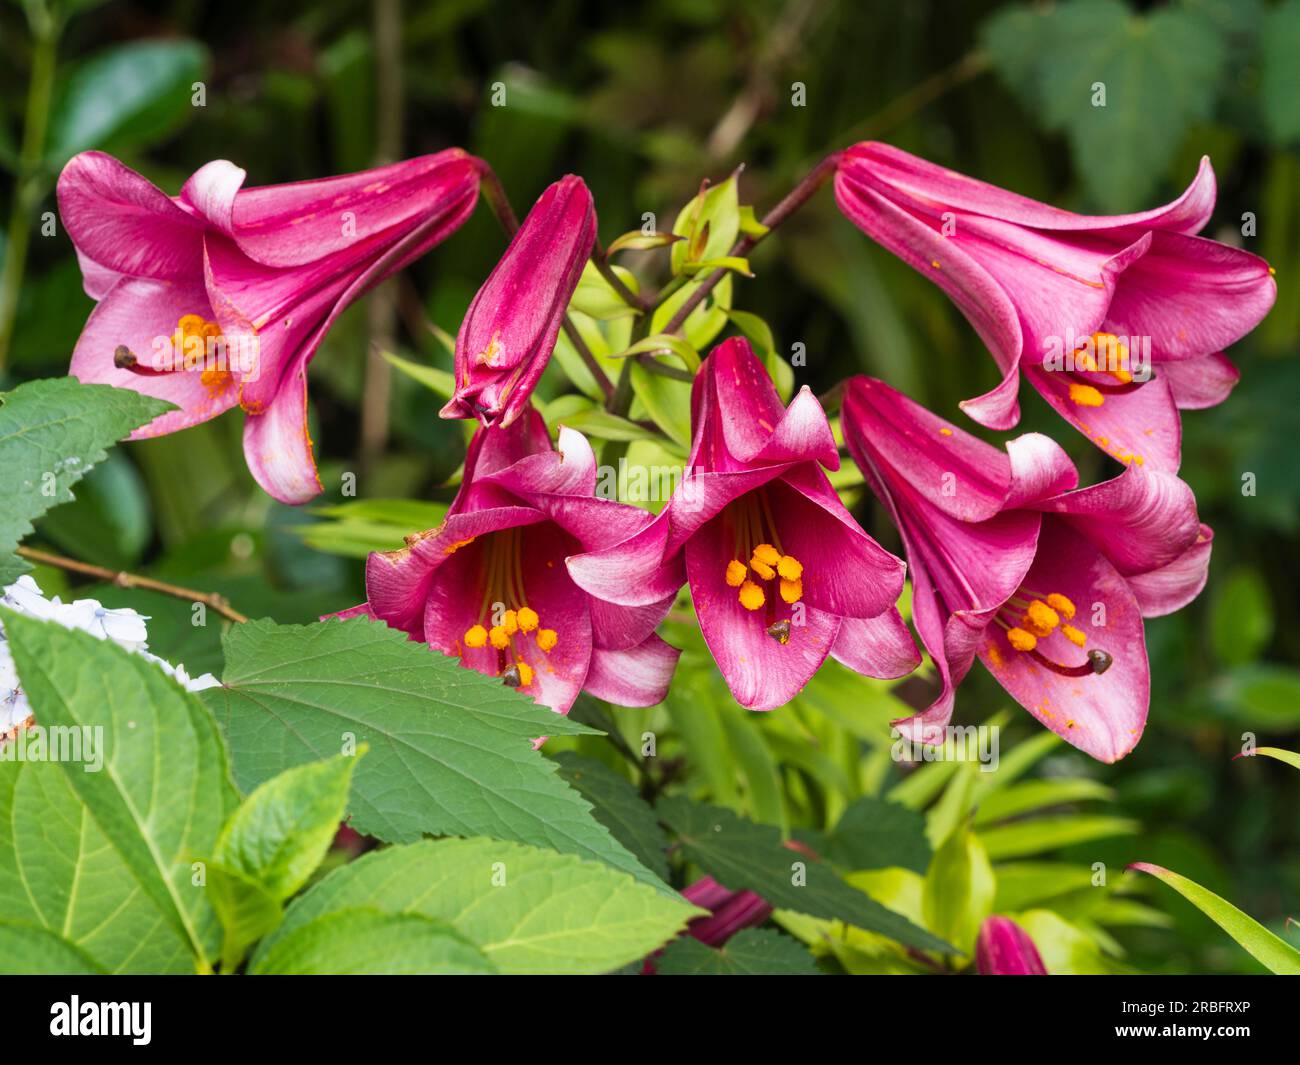 Fragrant, deep pink summer flowers of the trumpet lily, Lilium 'Pink Perfection' Stock Photo